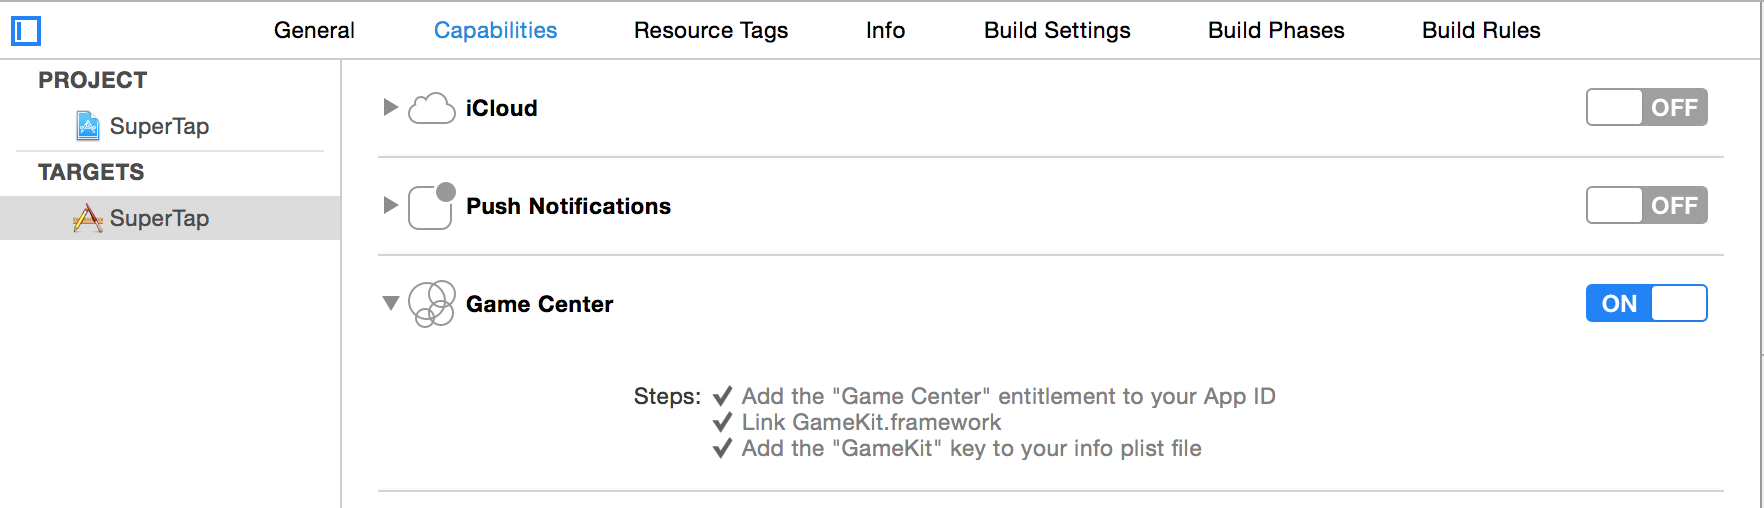 Figure 3: The results when you successfully enable the Game Center capability for the demo